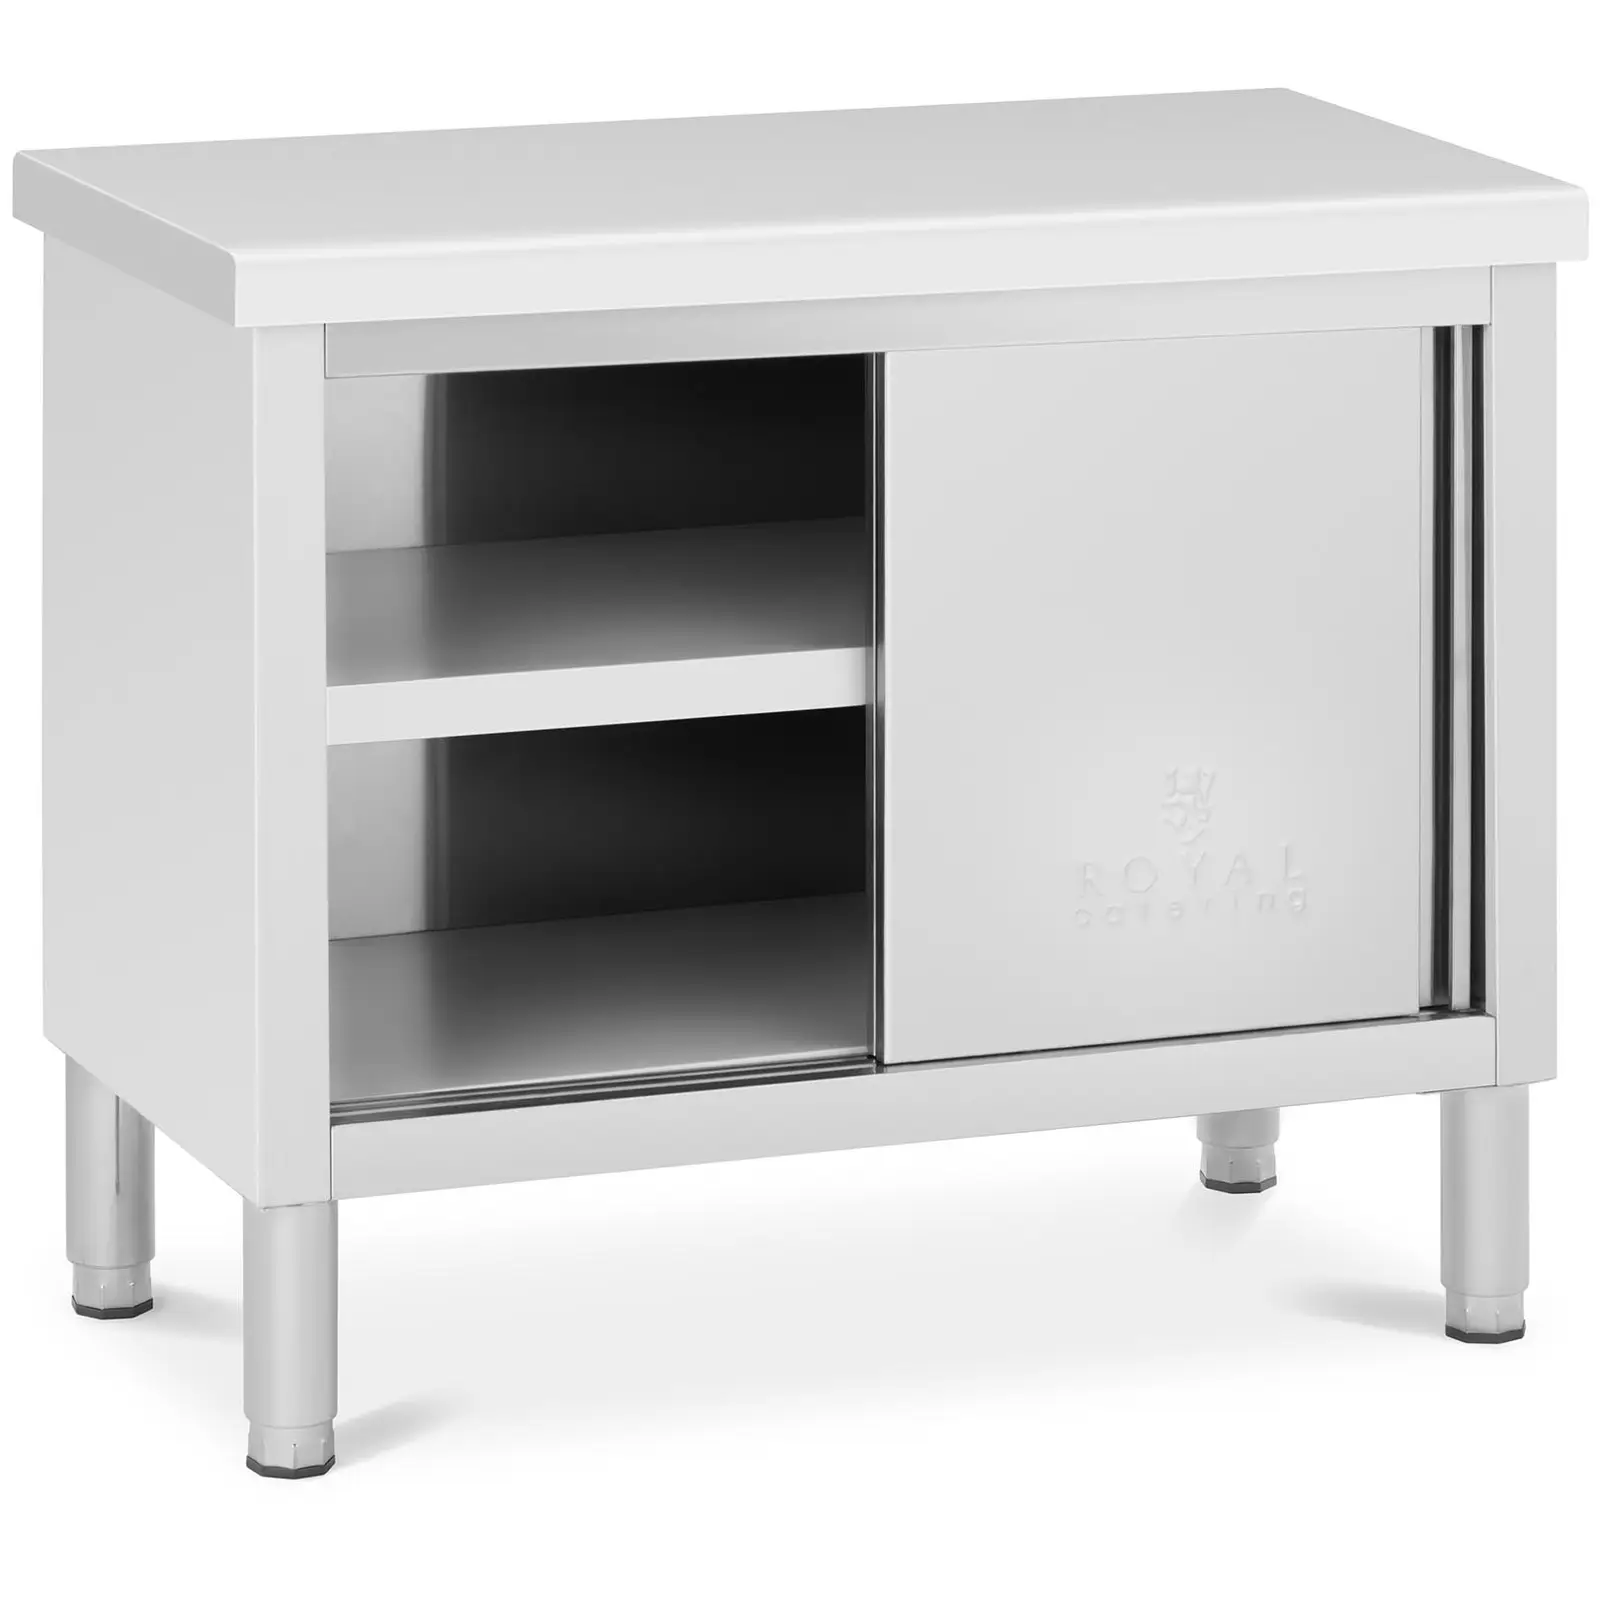 Stainless steel work cabinet - 100 x 50 cm - 285 kg capacity - Royal Catering